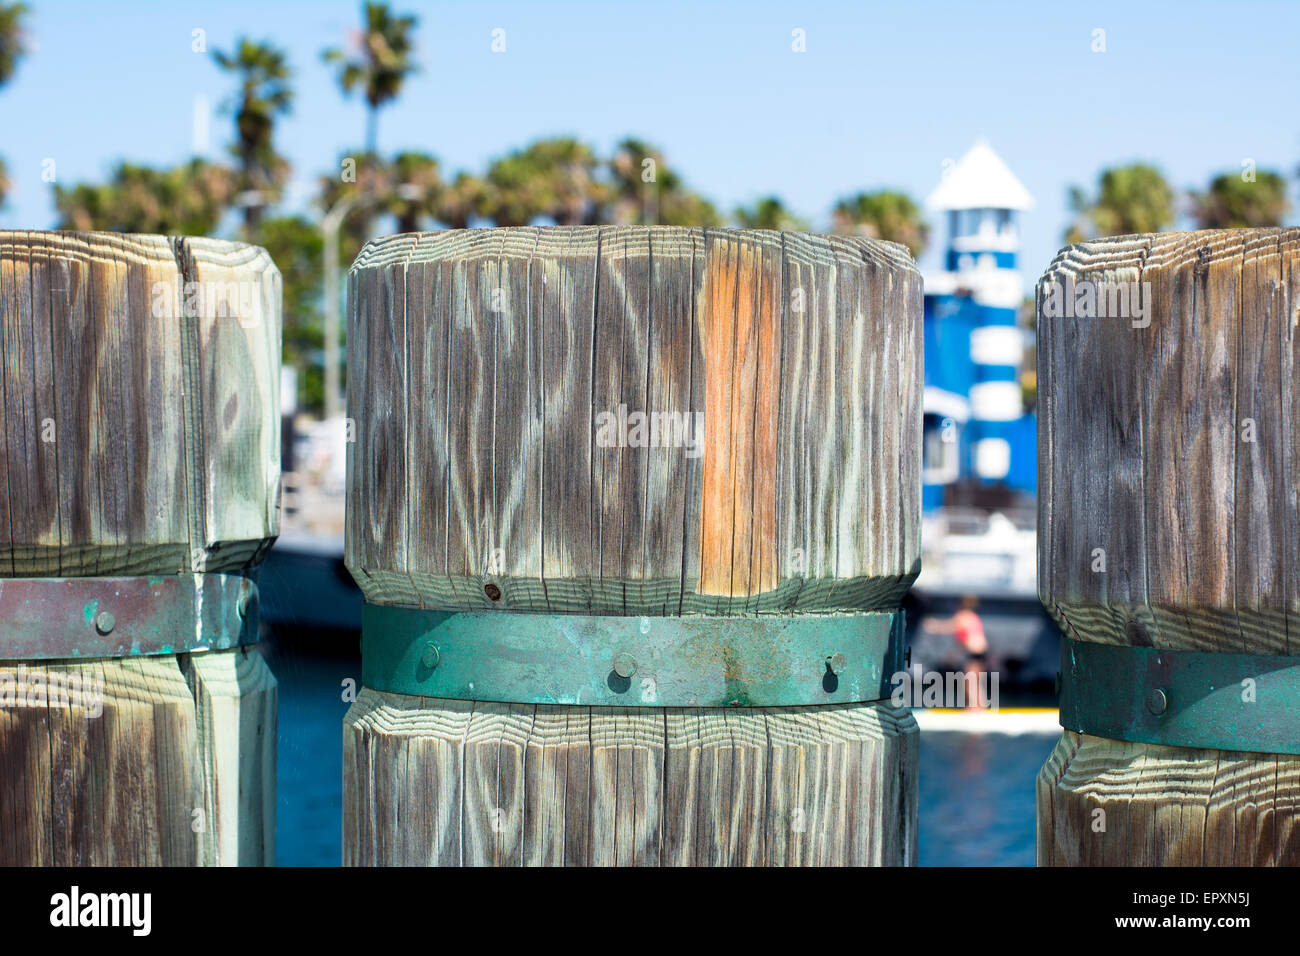 A close up of a wooden support post on a shoreline boardwalk in Redondo Beach California Stock Photo